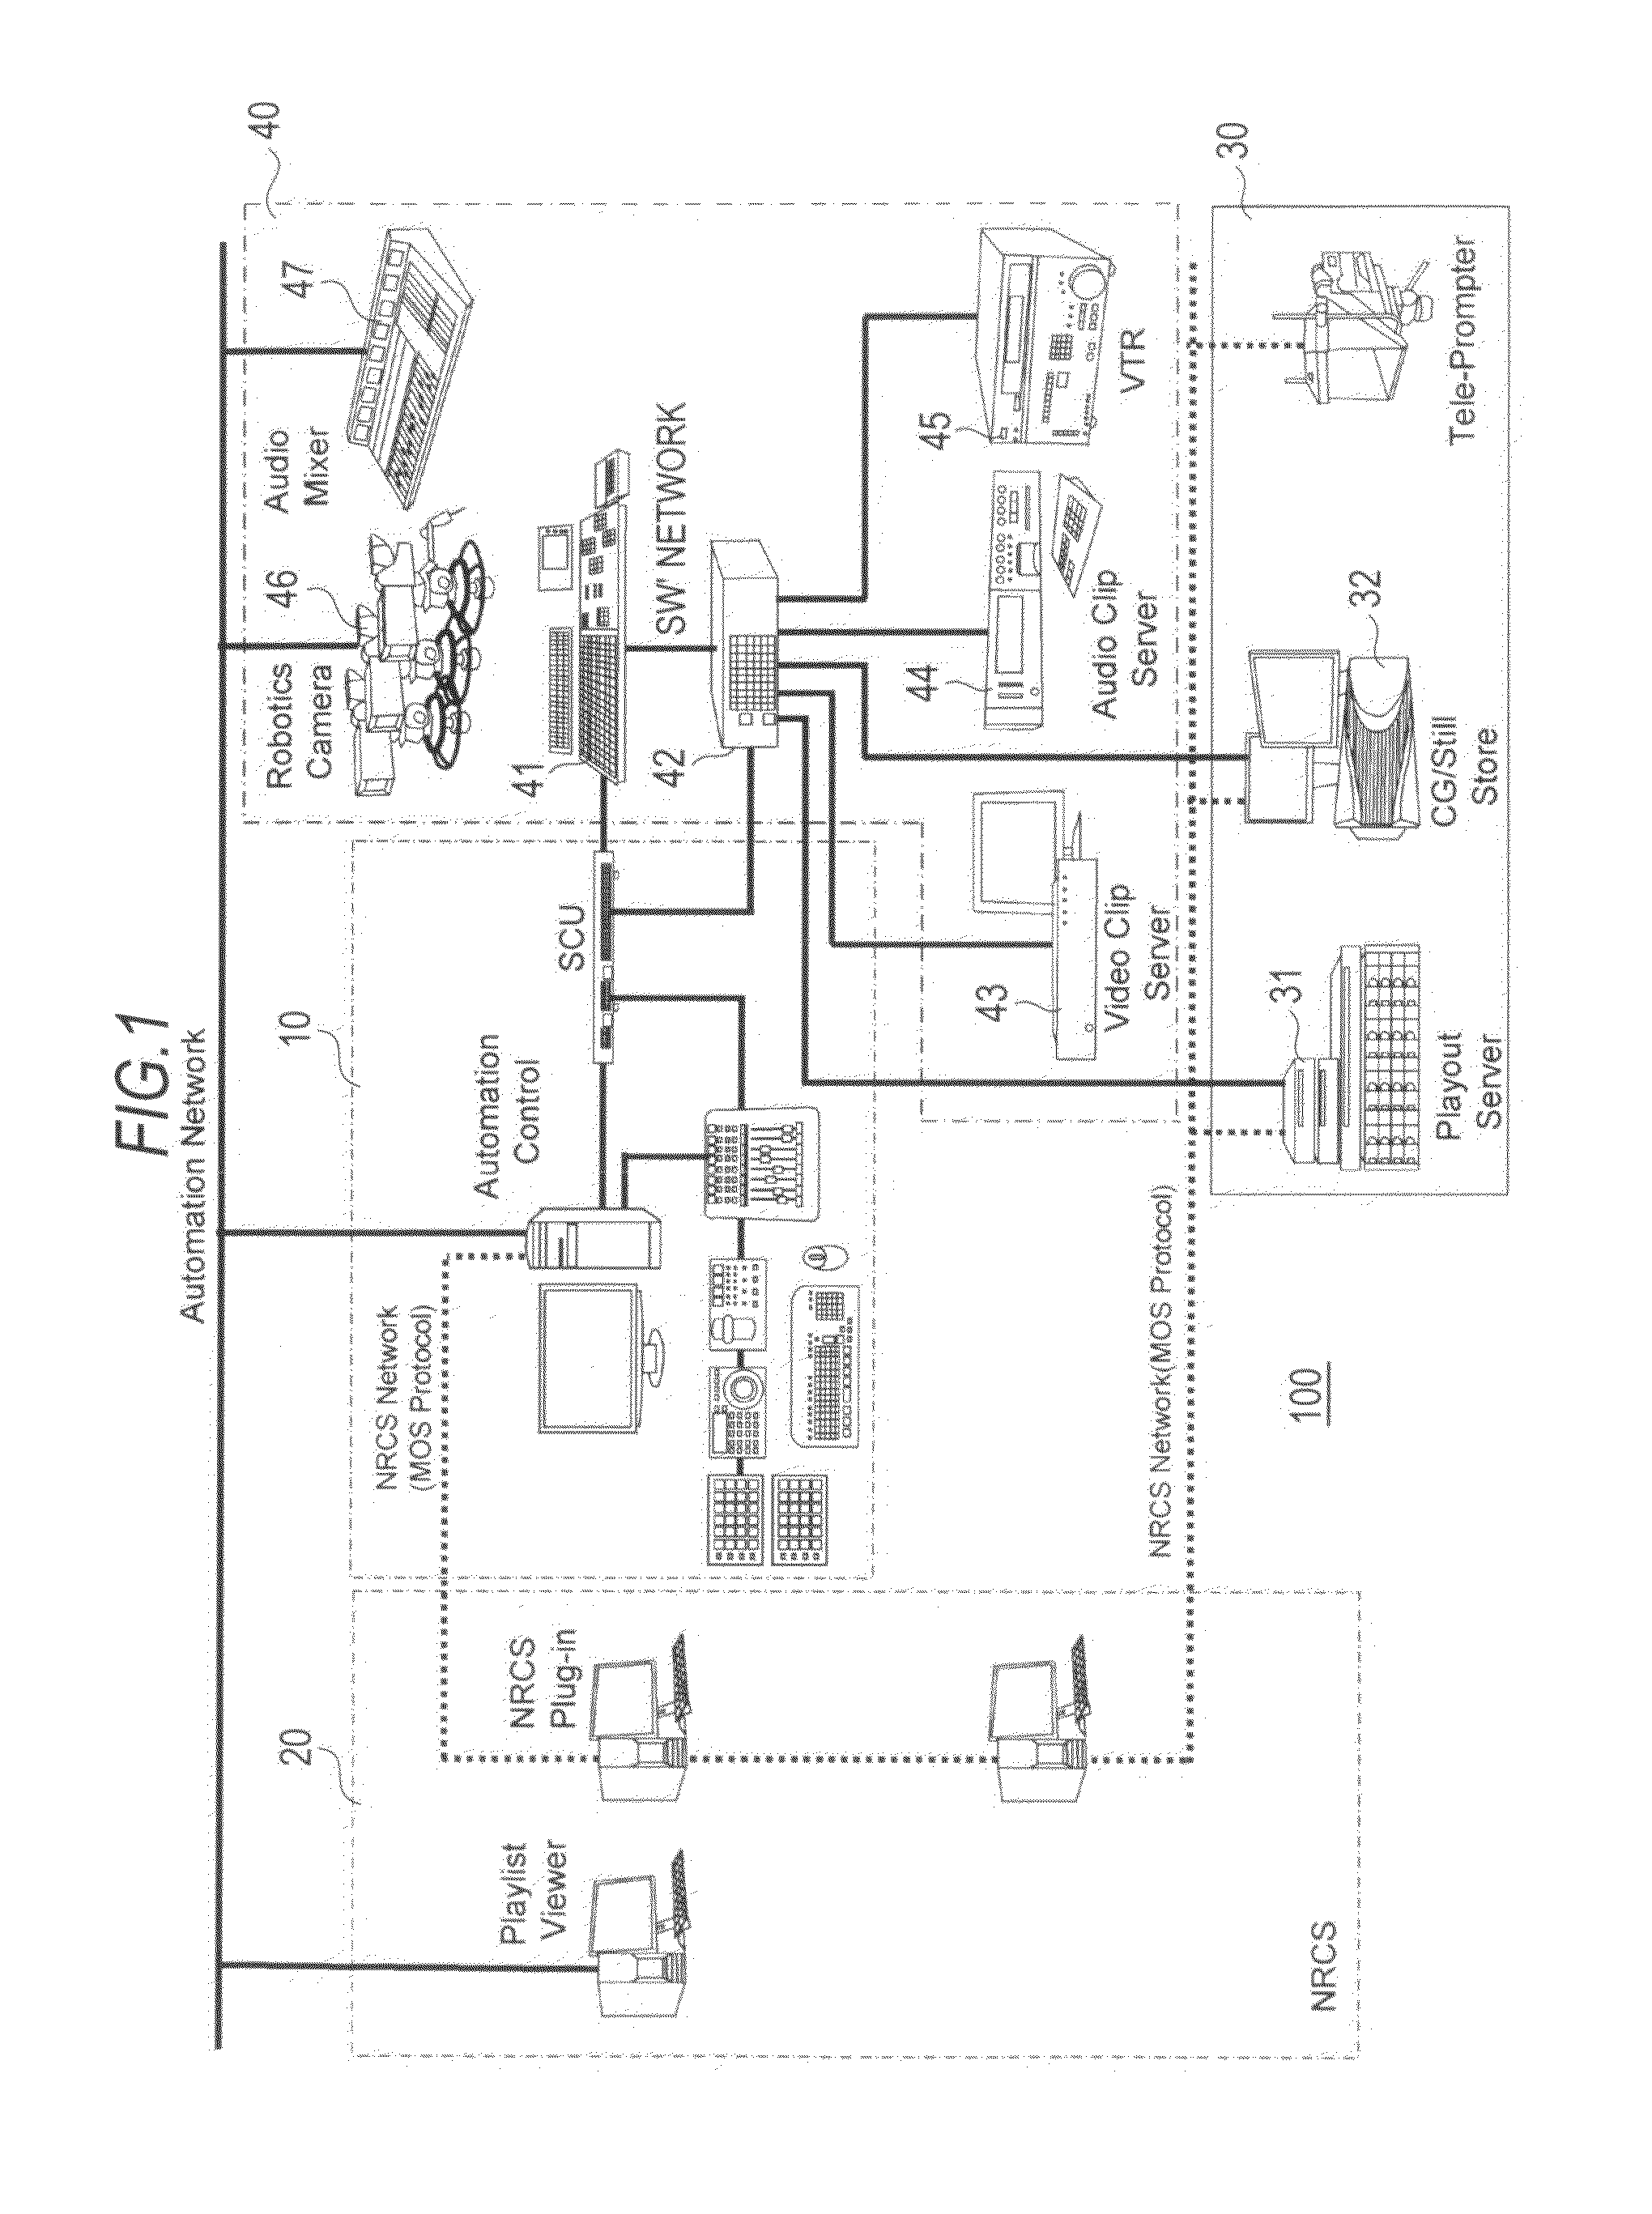 Switcher control device, switcher control method, and image synthesizing apparatus